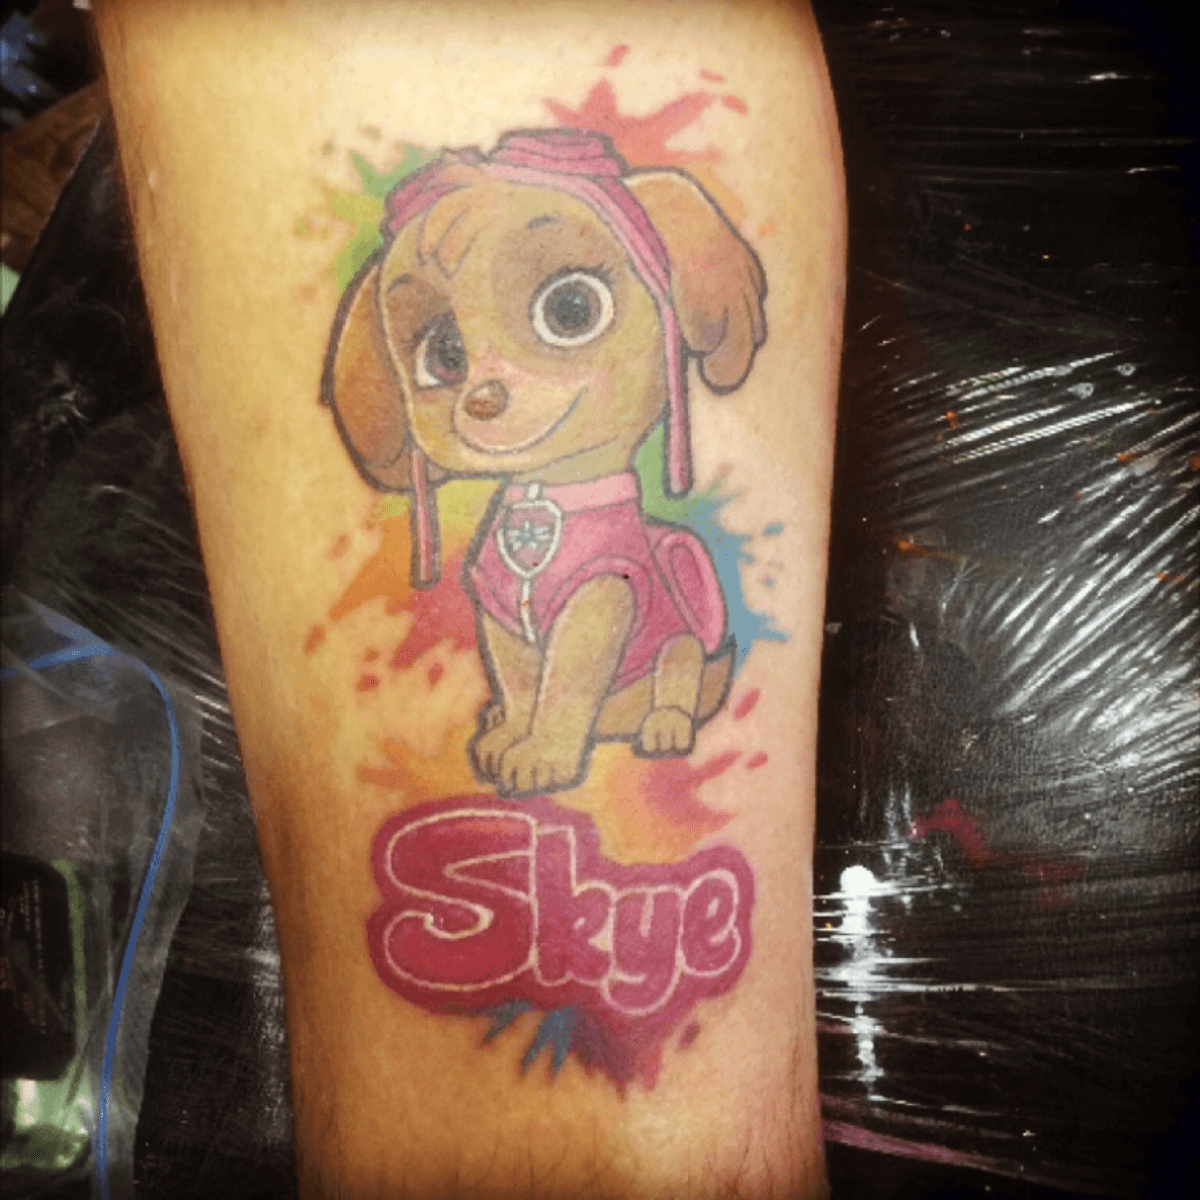 Tattoo Uploaded By Lauren Housley Mackenzie Paw Patrol Tattoo Of Skye Done Today Out Of My